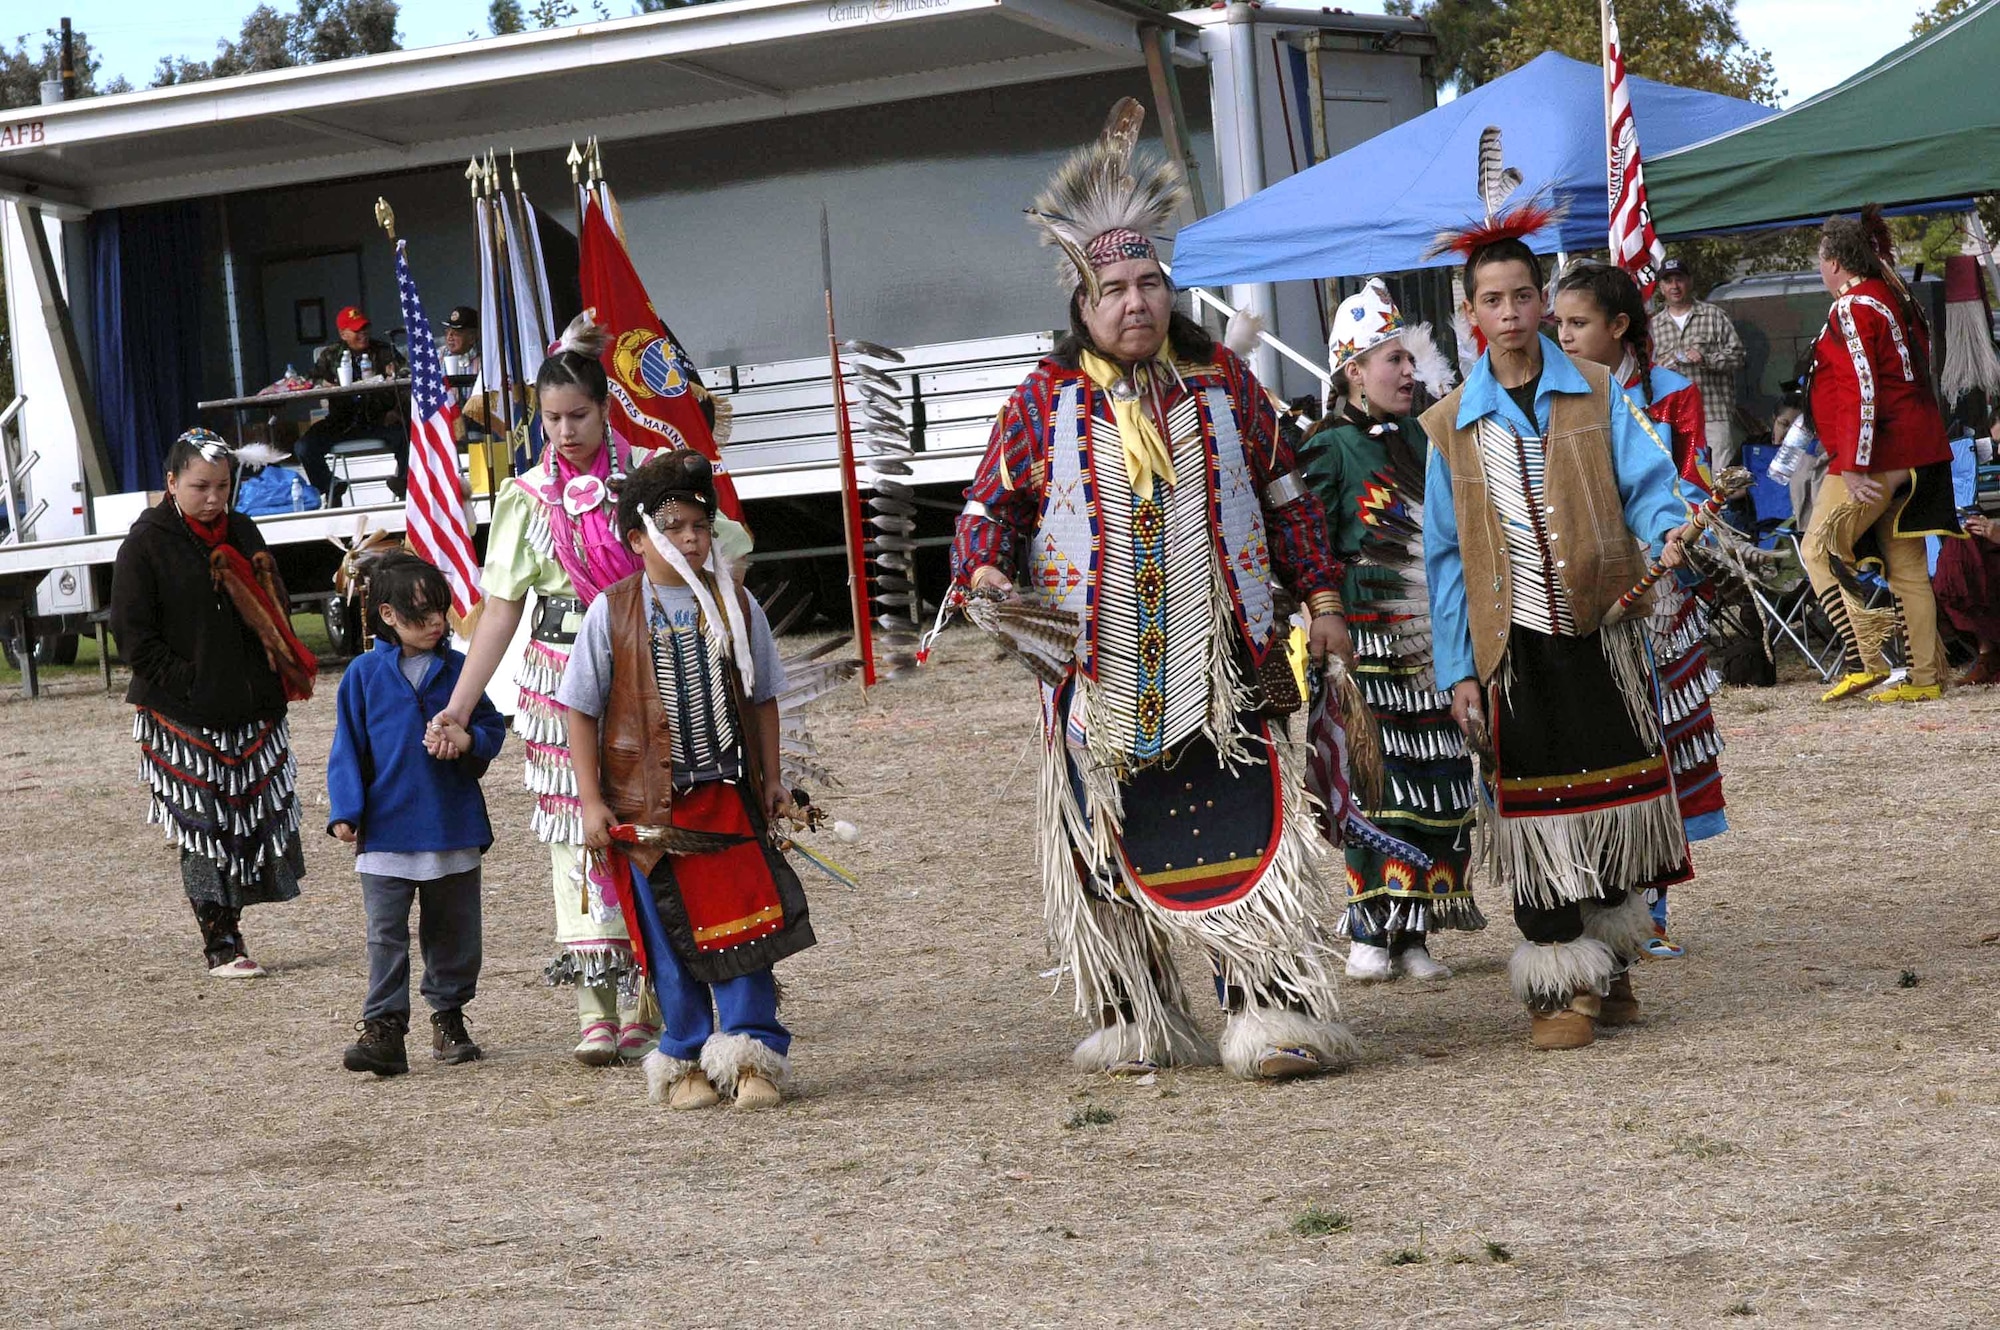 TRAVIS AIR FORCE BASE, Calif. (AFPN) -- Native Americans participate in a traditional dance during the fourth annual Veterans Pow Wow here. About 20 separate Native American nations were represented in the two-day event Nov. 5 and 6.  (U.S. Air Force photo by Airman 1st Class Tiffany Low)